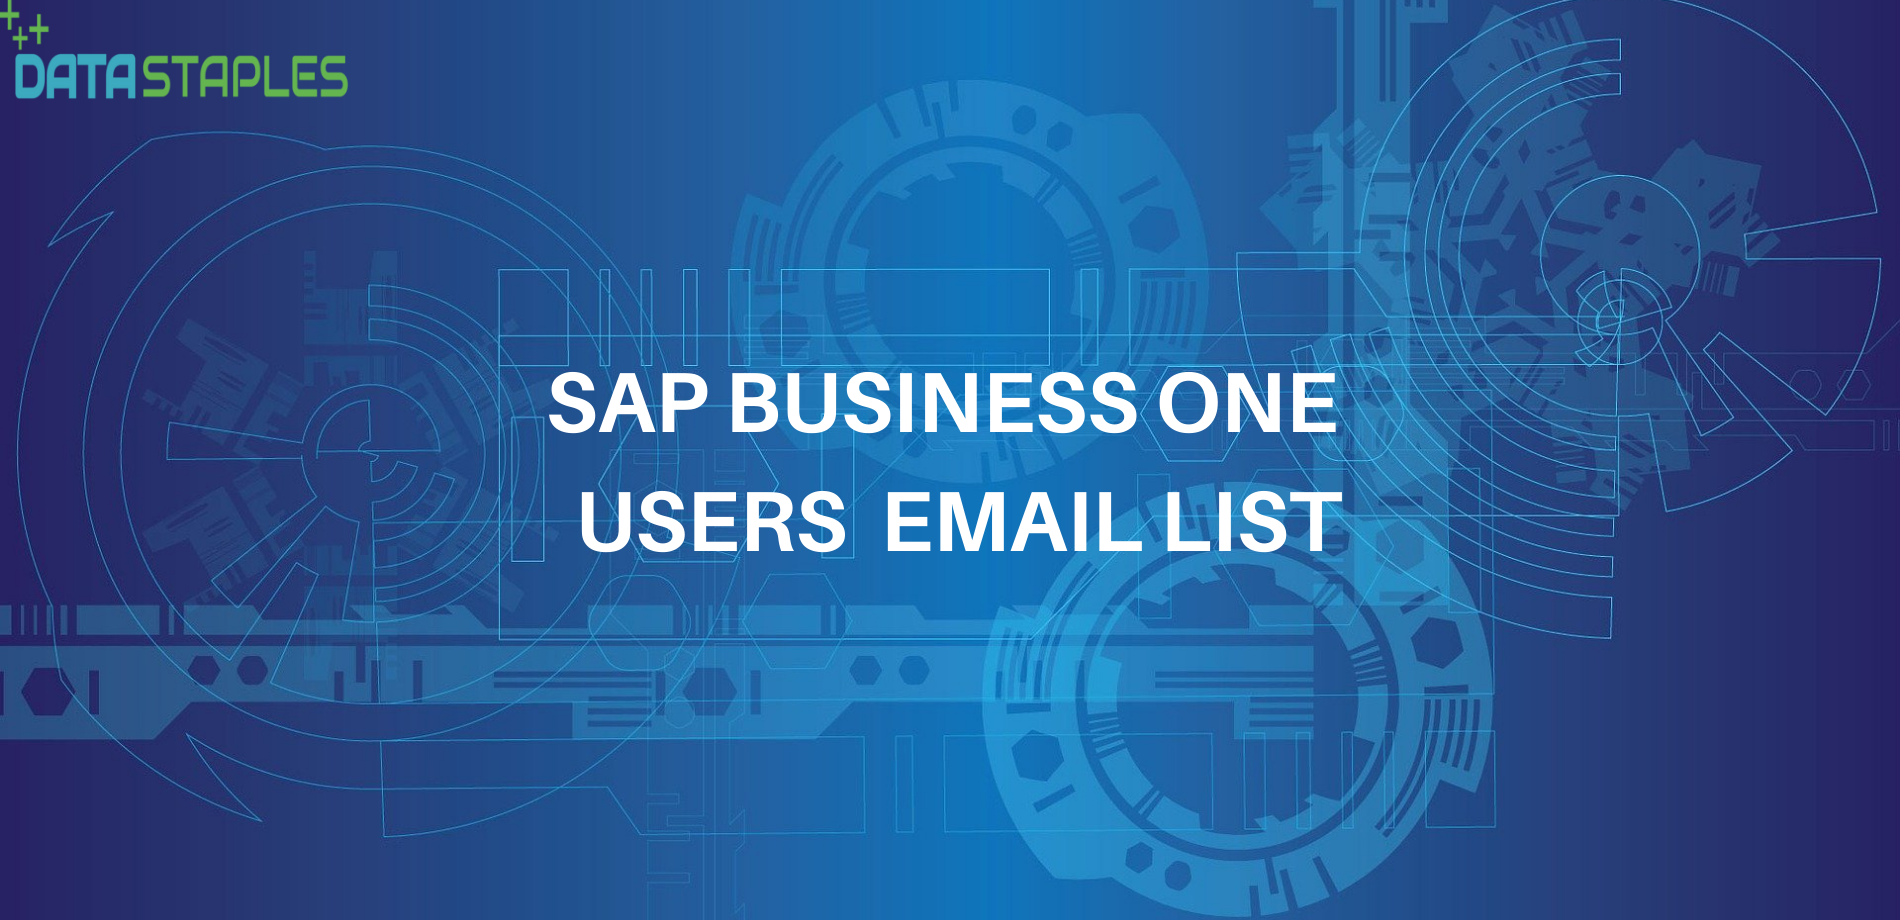 SAP Business One Users Mailing List | Datastaples